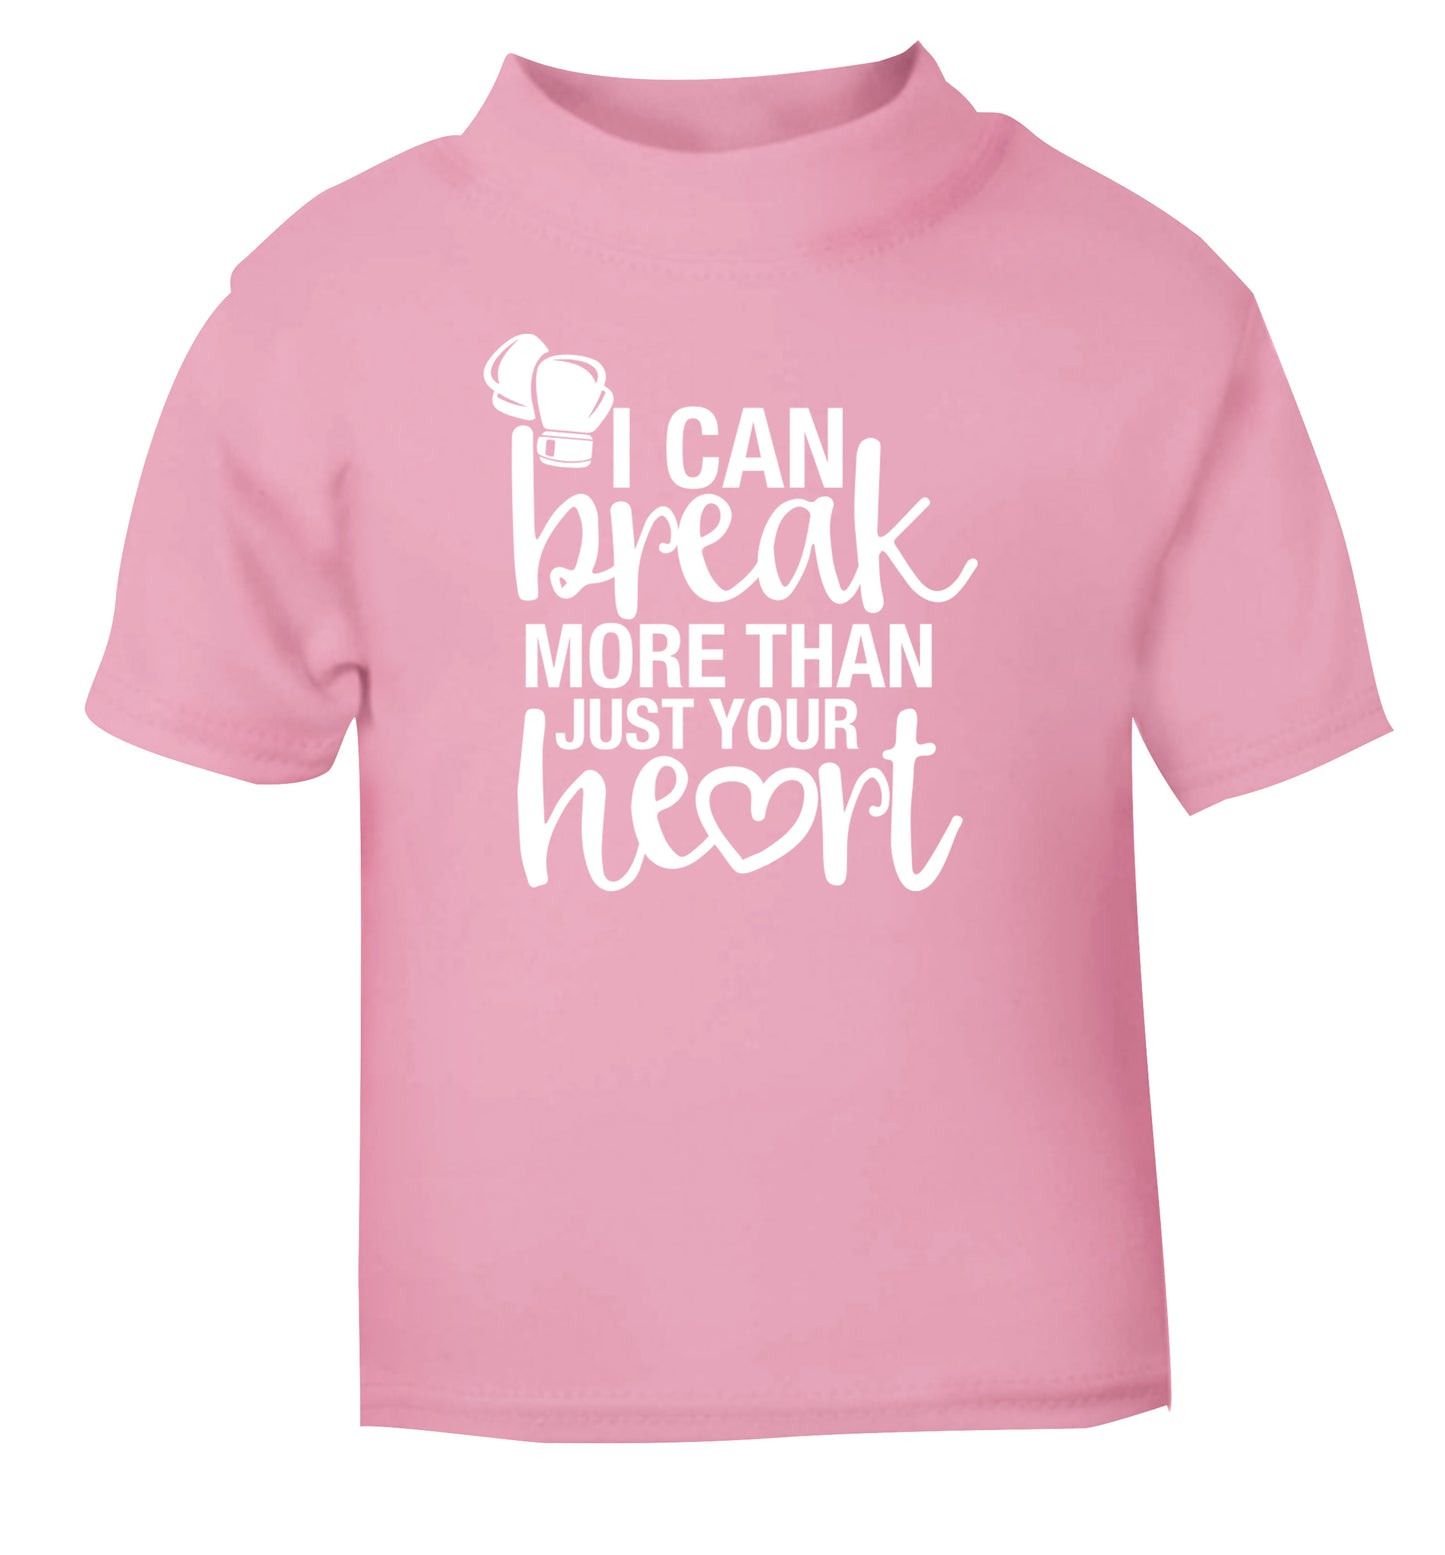 I can break more than just your heart light pink Baby Toddler Tshirt 2 Years